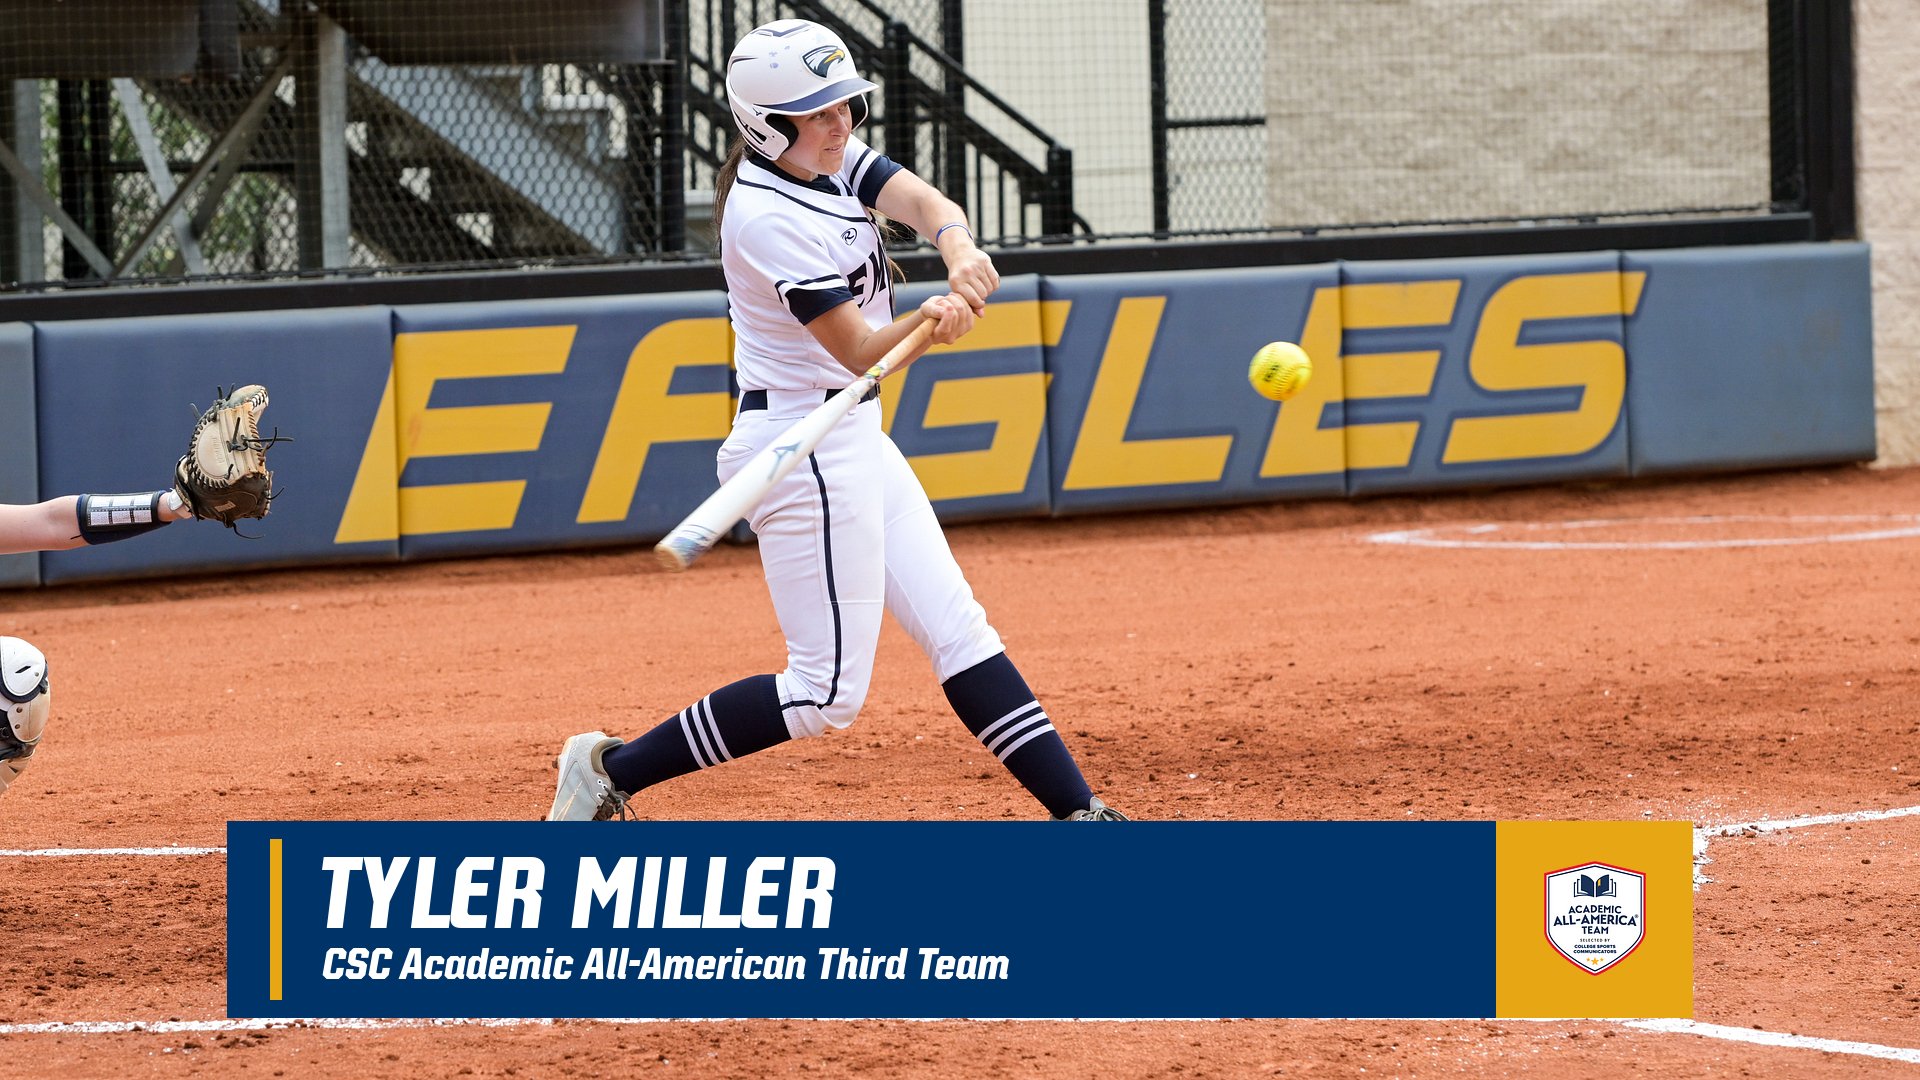 Tyler Miller Named to CSC Academic All-America Third Team